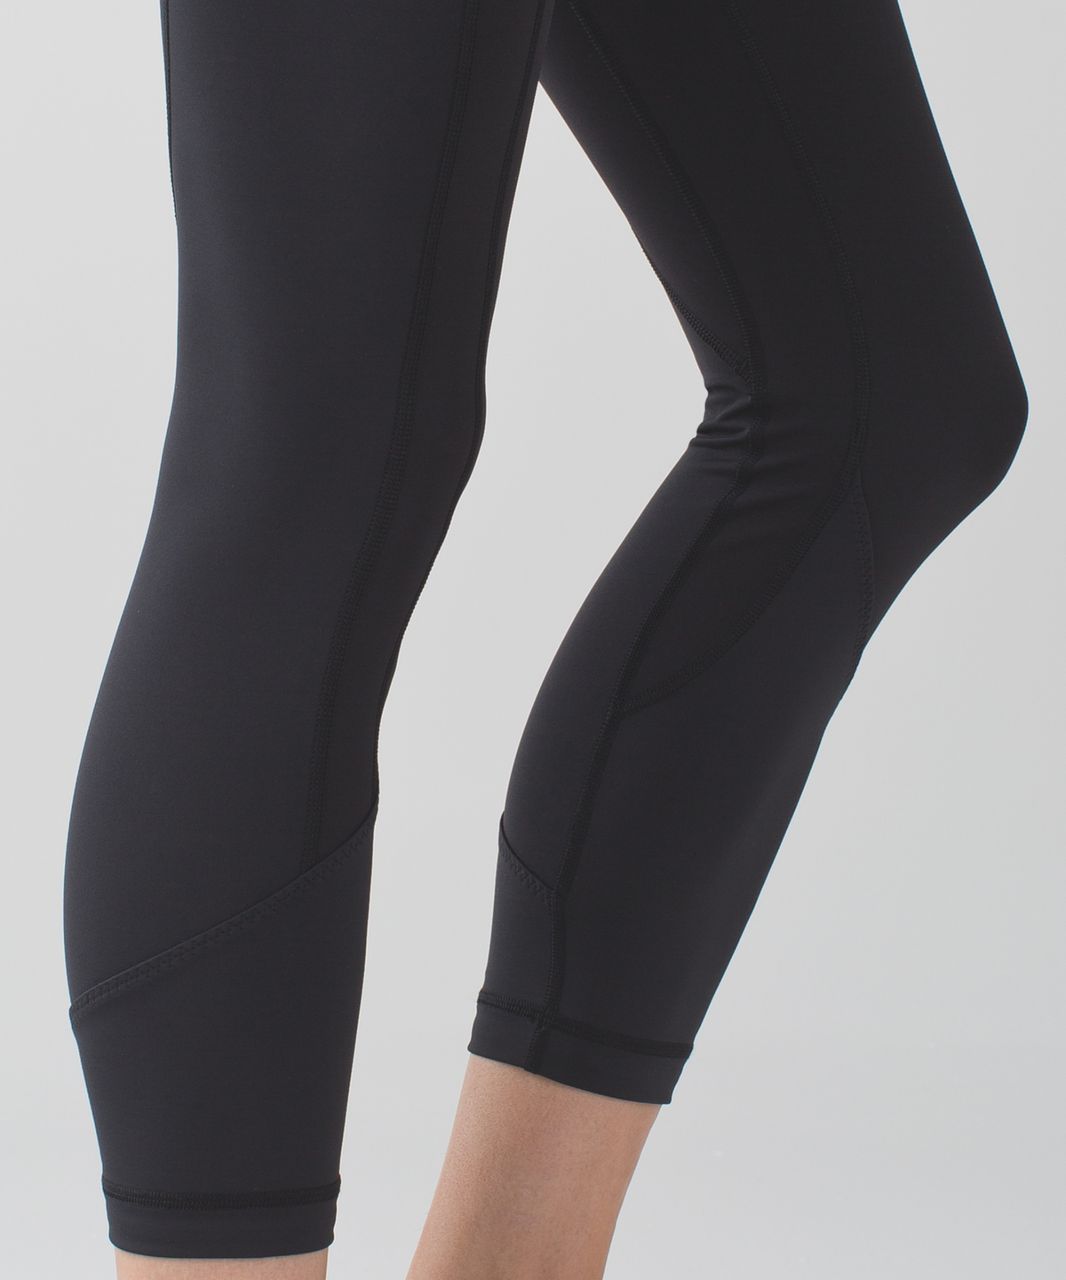 Lululemon All The Right Places Crop II - Black